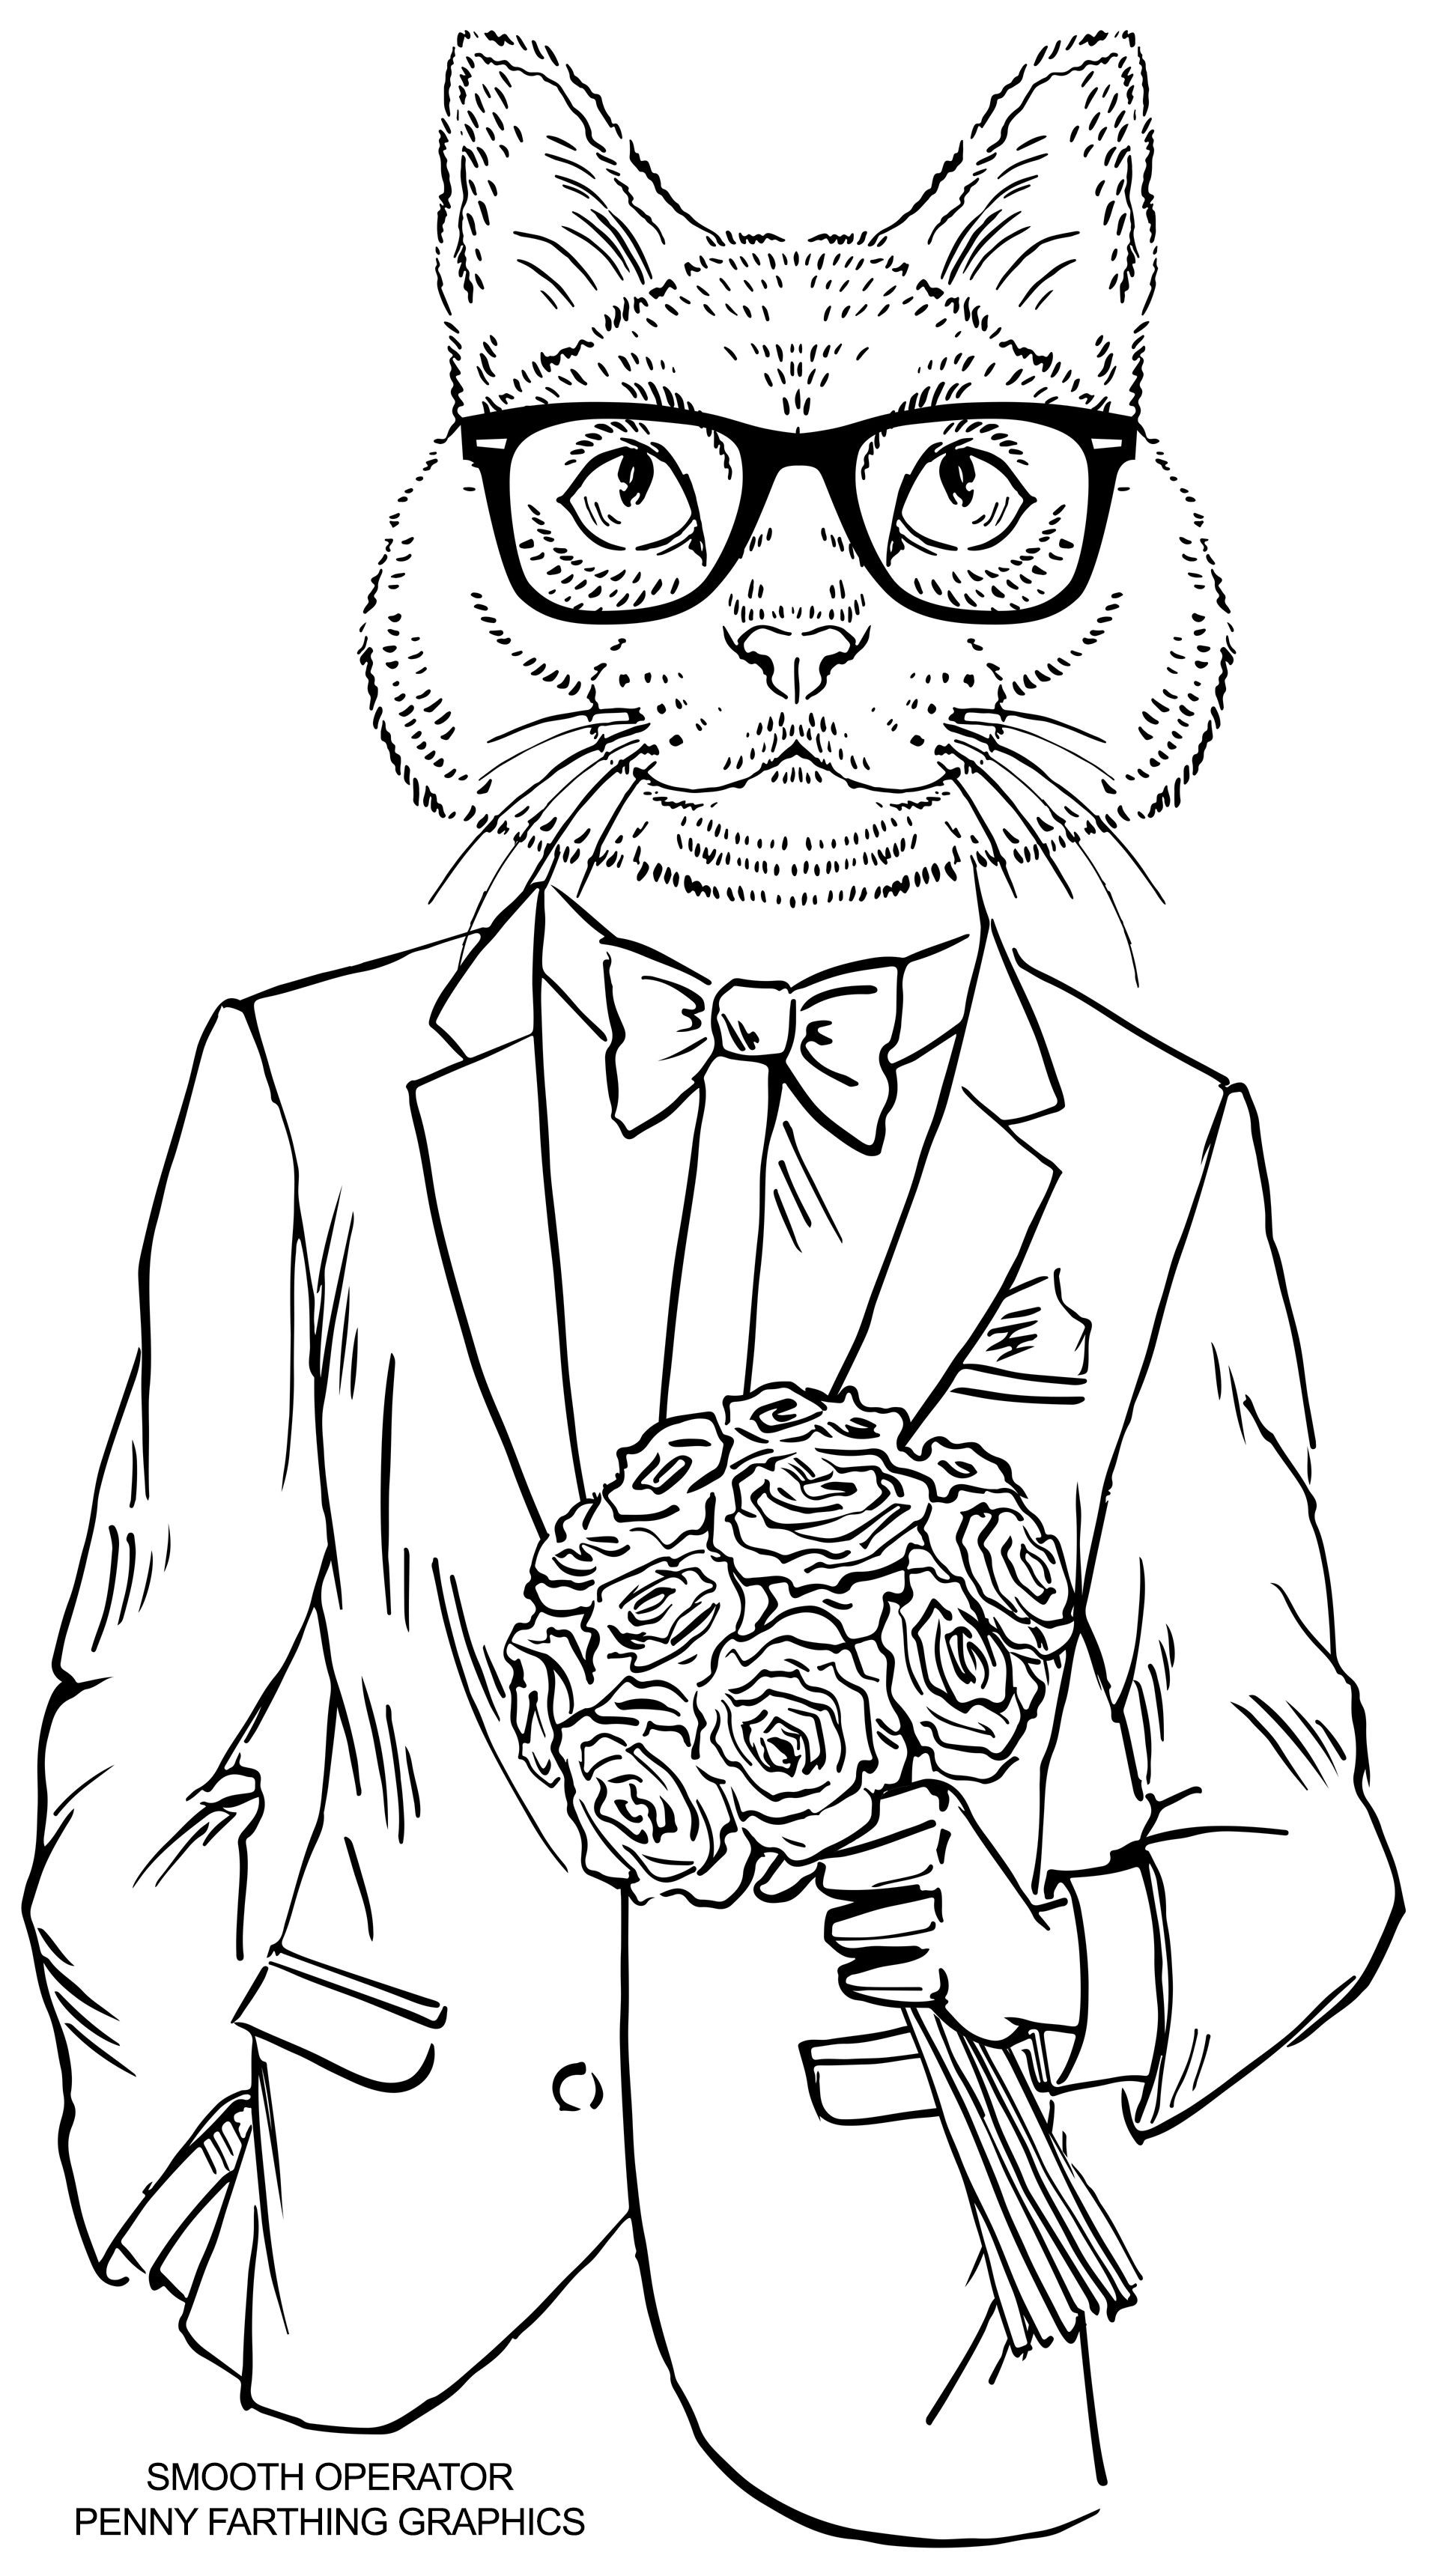 Cats Adult Coloring Book
 Cat from “Smooth Operator” Would love to these